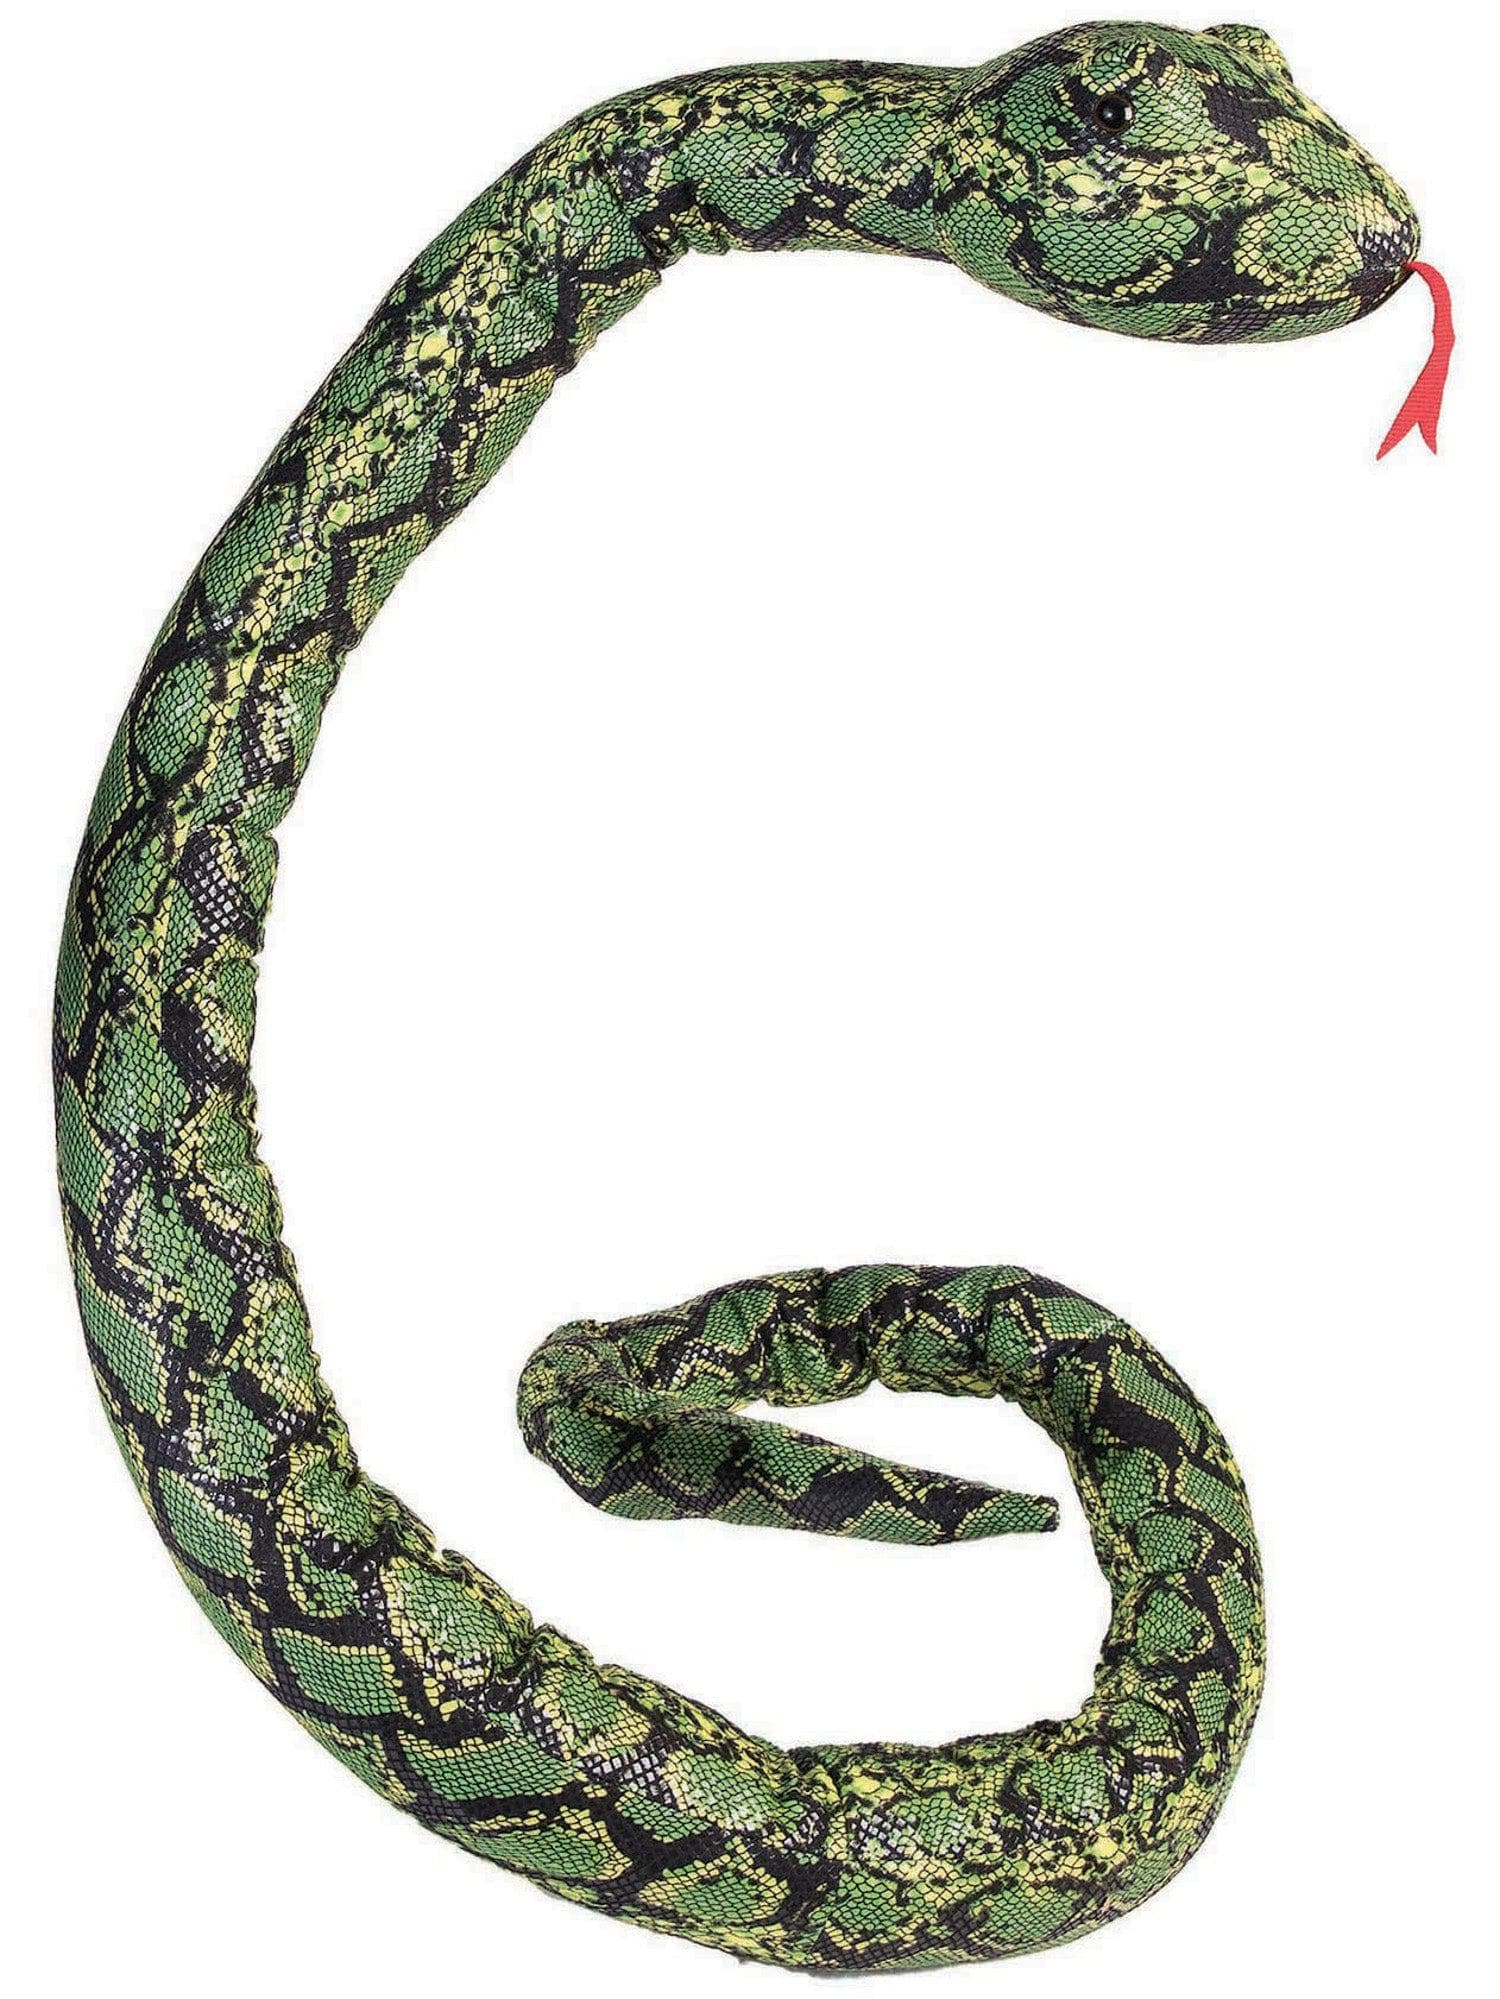 78-inch Posable Green Snake - costumes.com